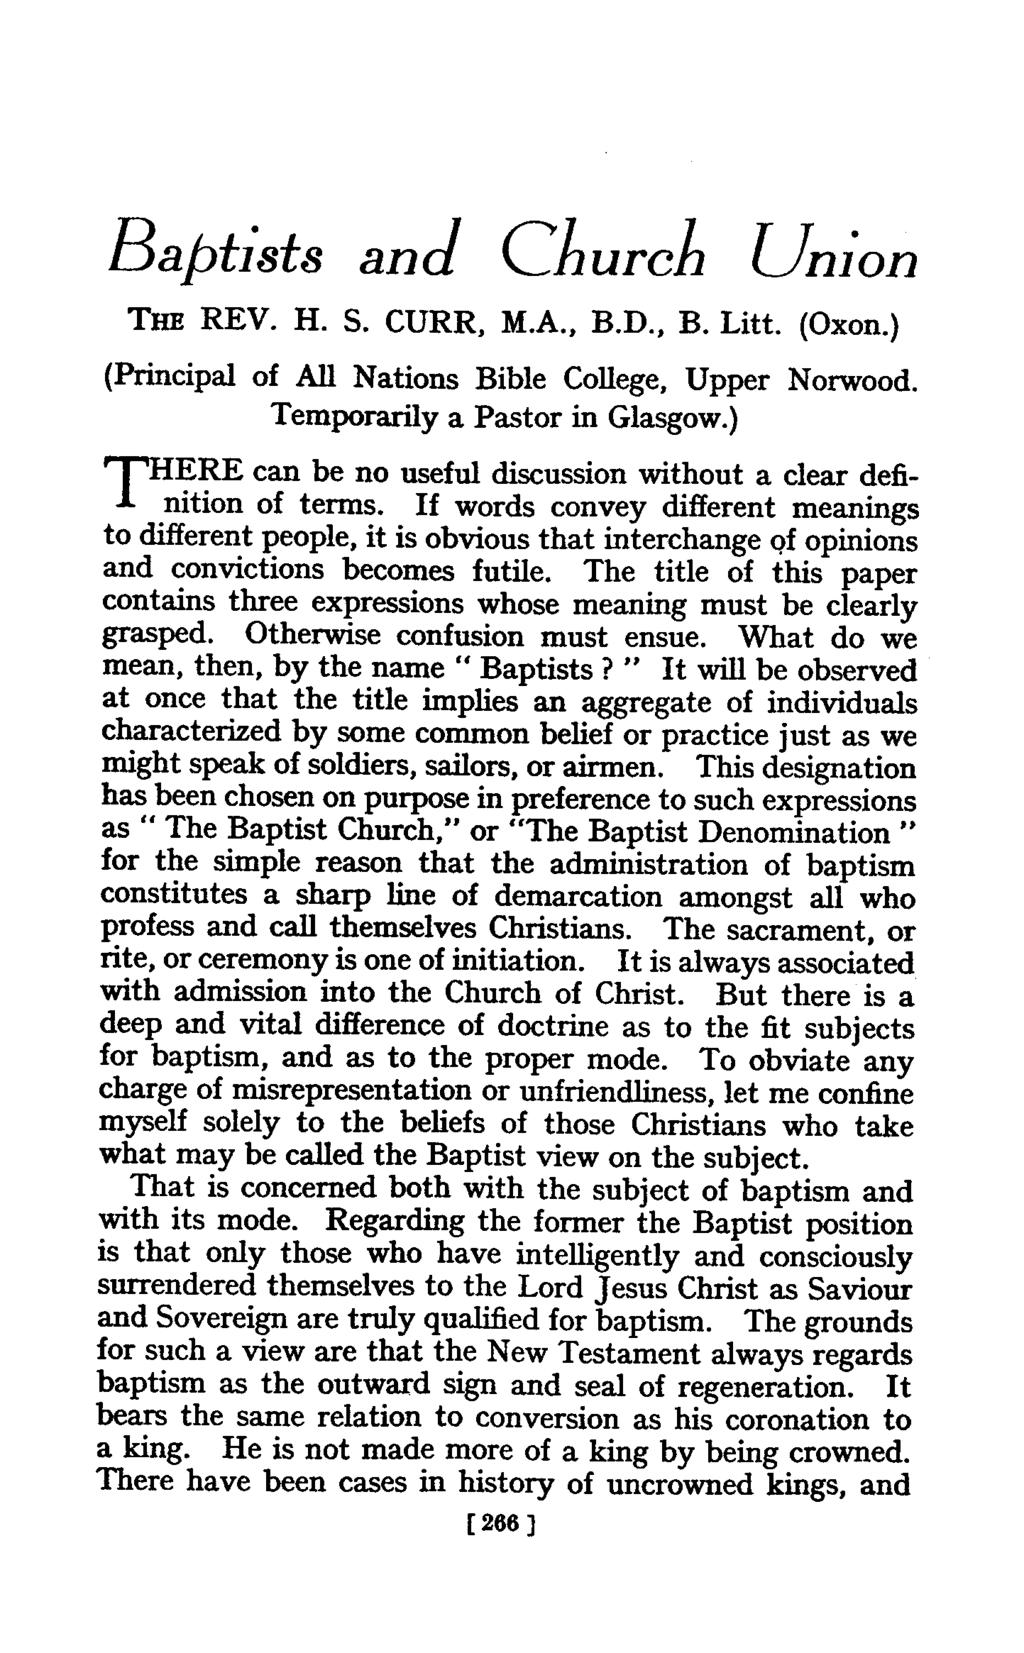 Baptists and Church Union THE REV. H. S. CURR, M.A., B.D., B. Litt. (Oxon.) (Principal of All Nations Bible College, Upper Norwood. Temporarily a Pastor in Glasgow.